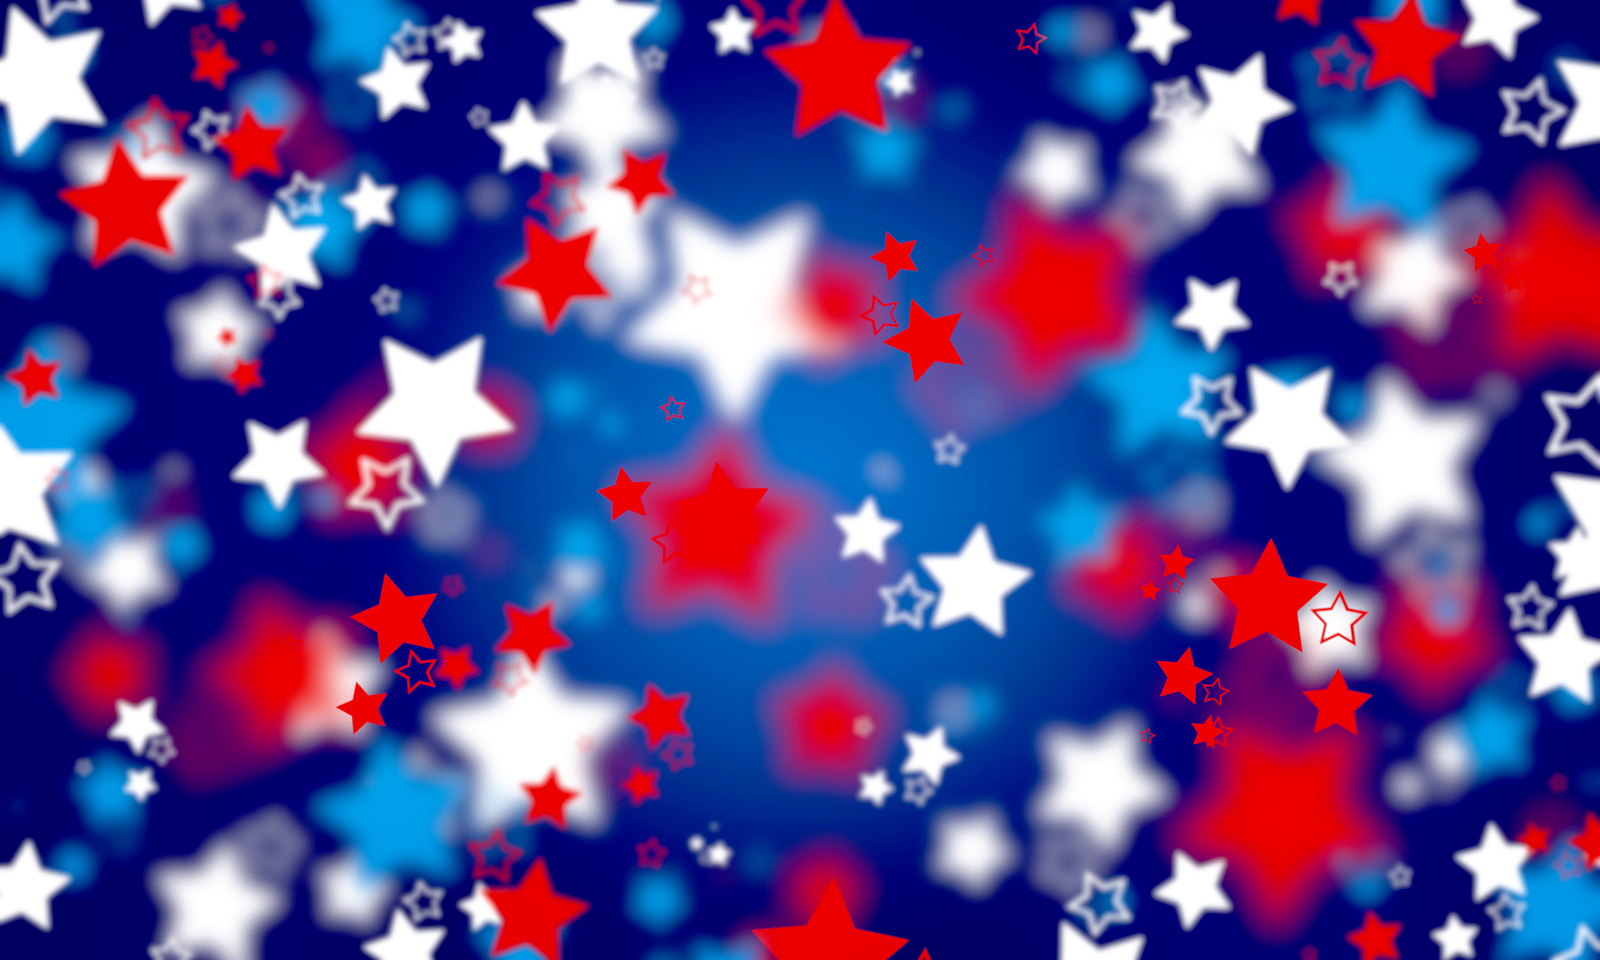 Abstract, American flag colors, background, blue, spot, blurred, bright, bokeh background, celebration, color, colorful, design, figure, festive, holiday, invitation, light, many stars, bokeh, new, pattern, red, shiny ,sloppy, star, stars, oscillating, wh